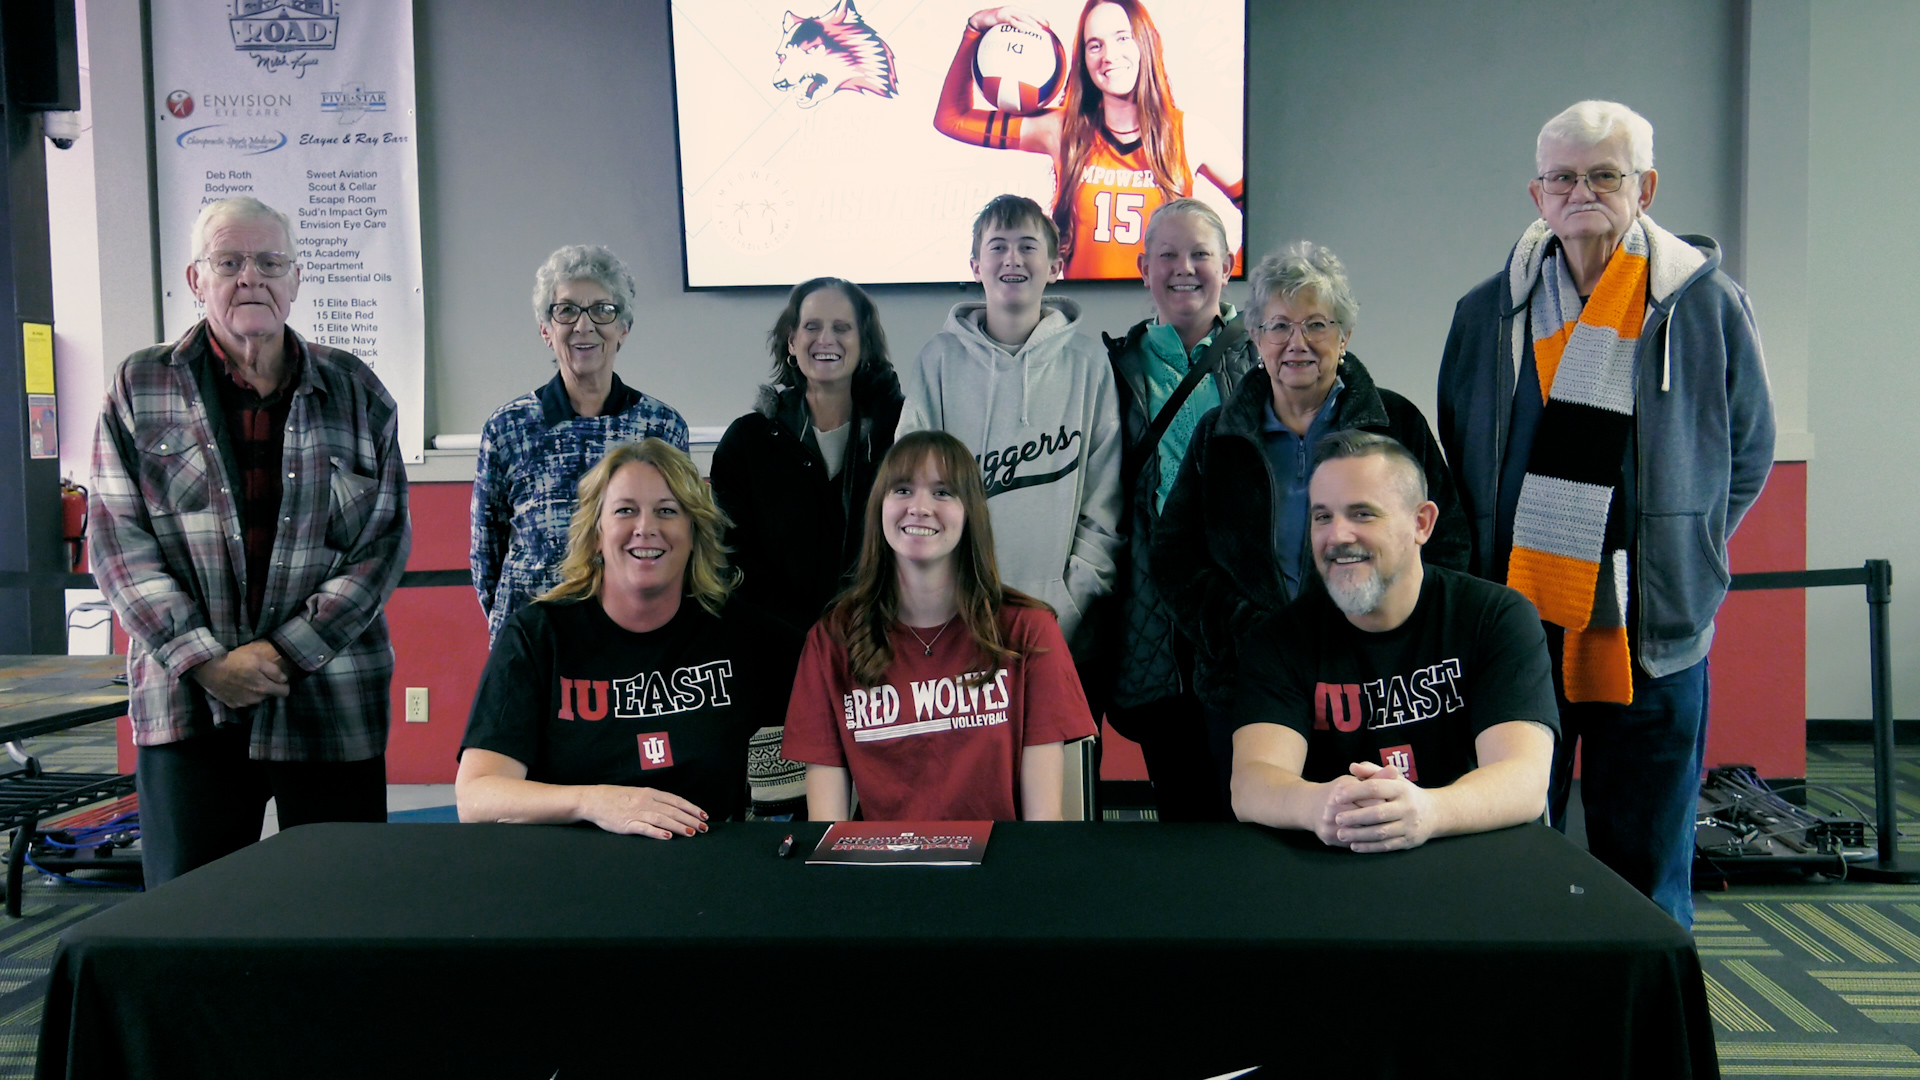 Bishop Dwenger & Empowered senior Aislyn Hogan signs with IU East volleyball